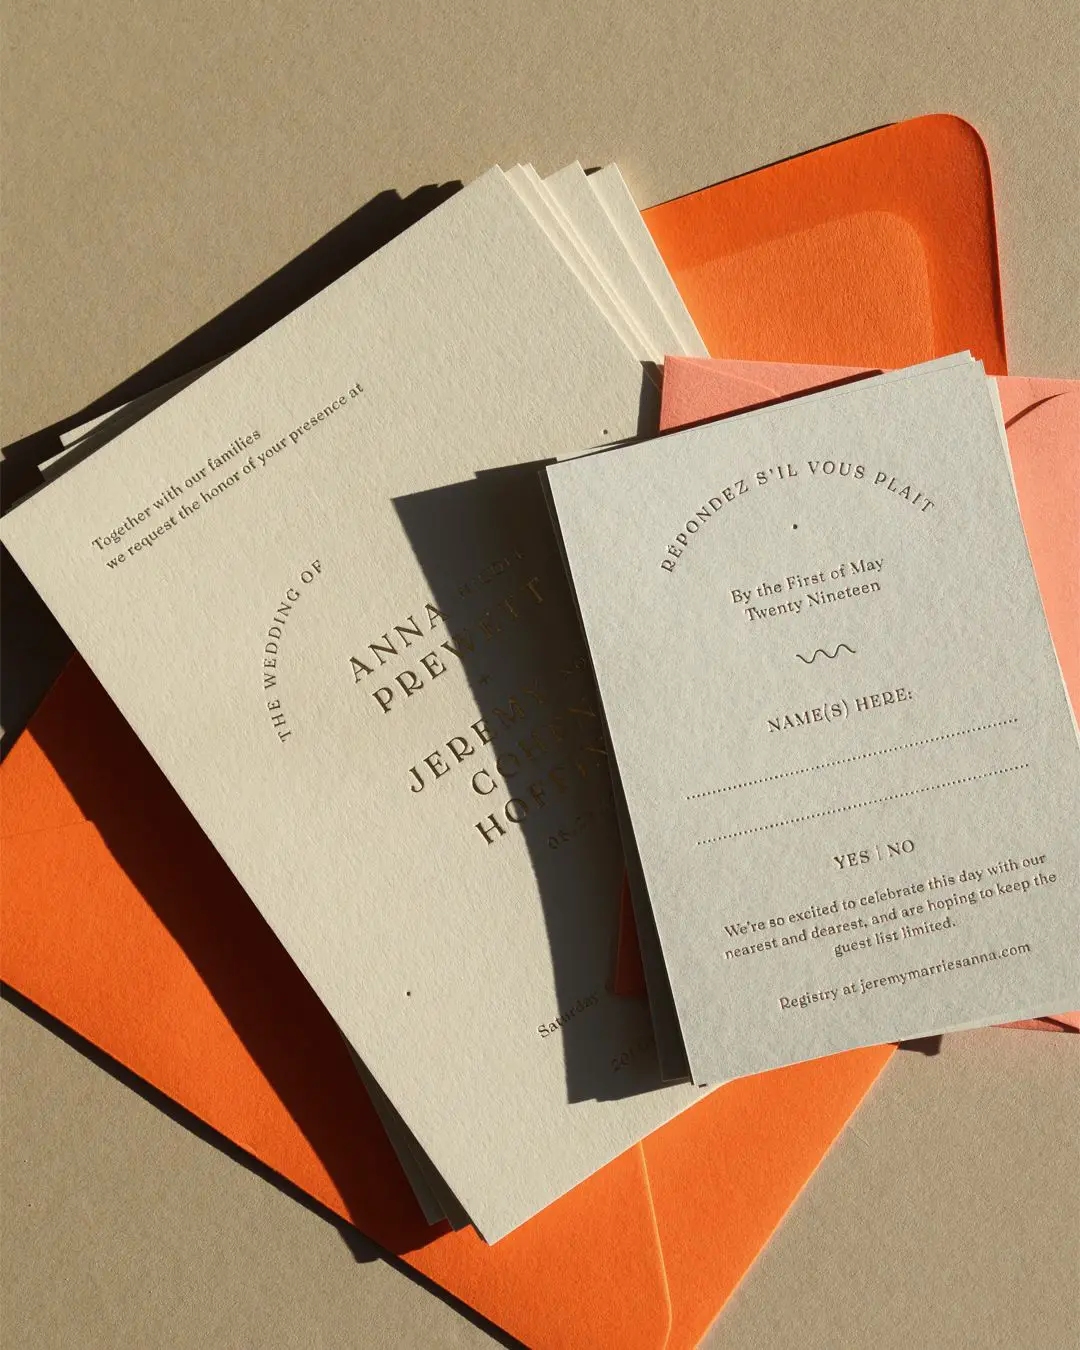 When should you send your wedding invitations? â Nicety Studio